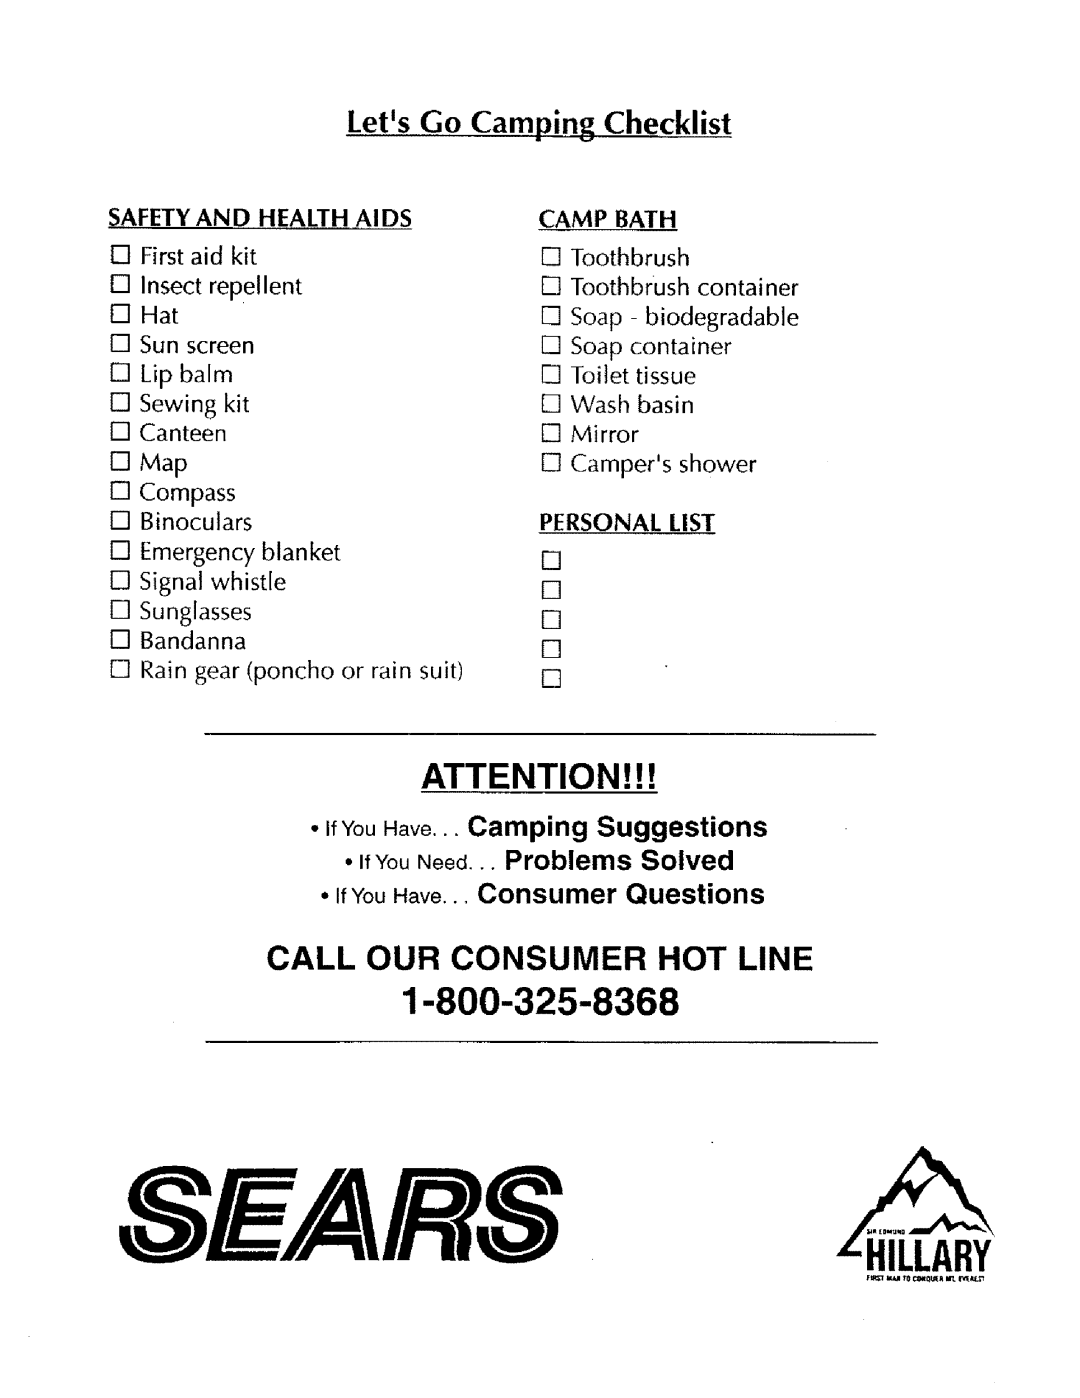 Sears 308.70002 Call Our Consumer Hot Line, LetsGo Camping Checklist, If You Have.., Consumer Questions, Personal List 